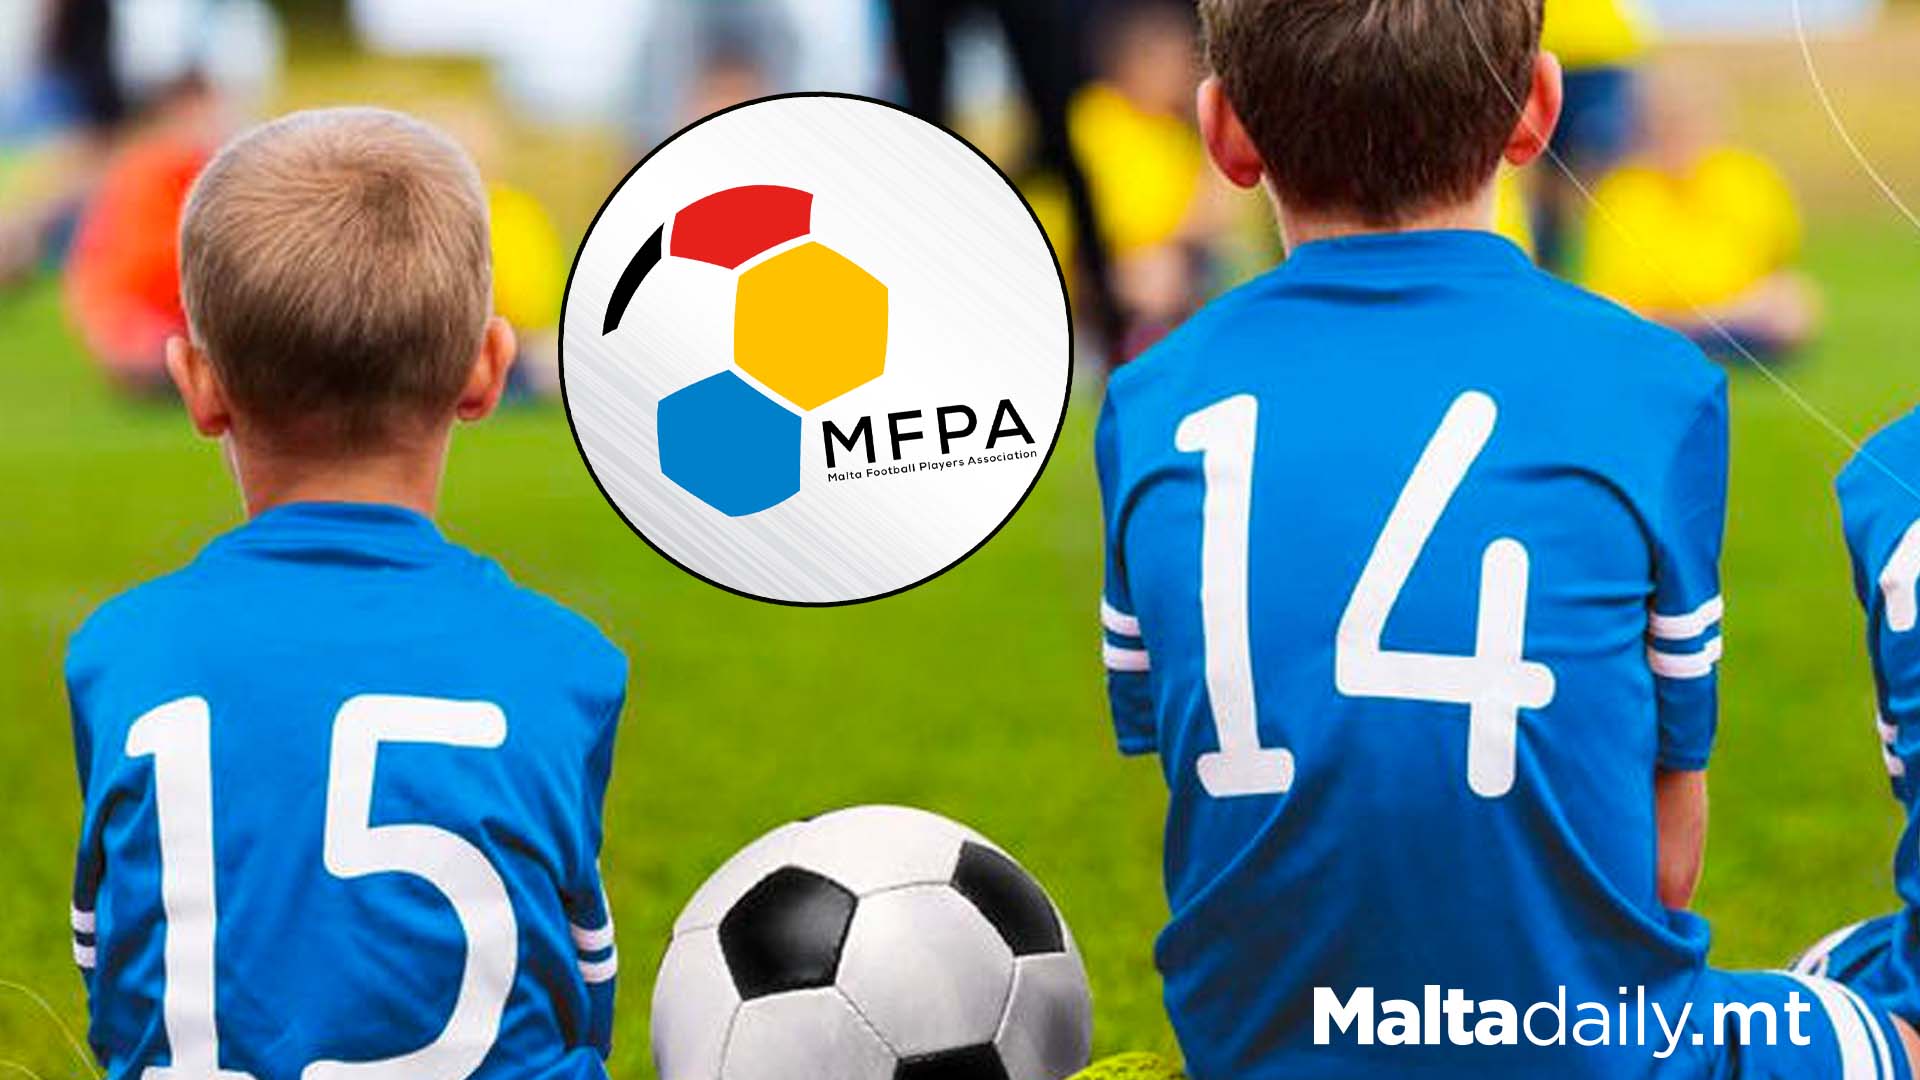 MFPA Calls For End To Exploitations of Children Footballers